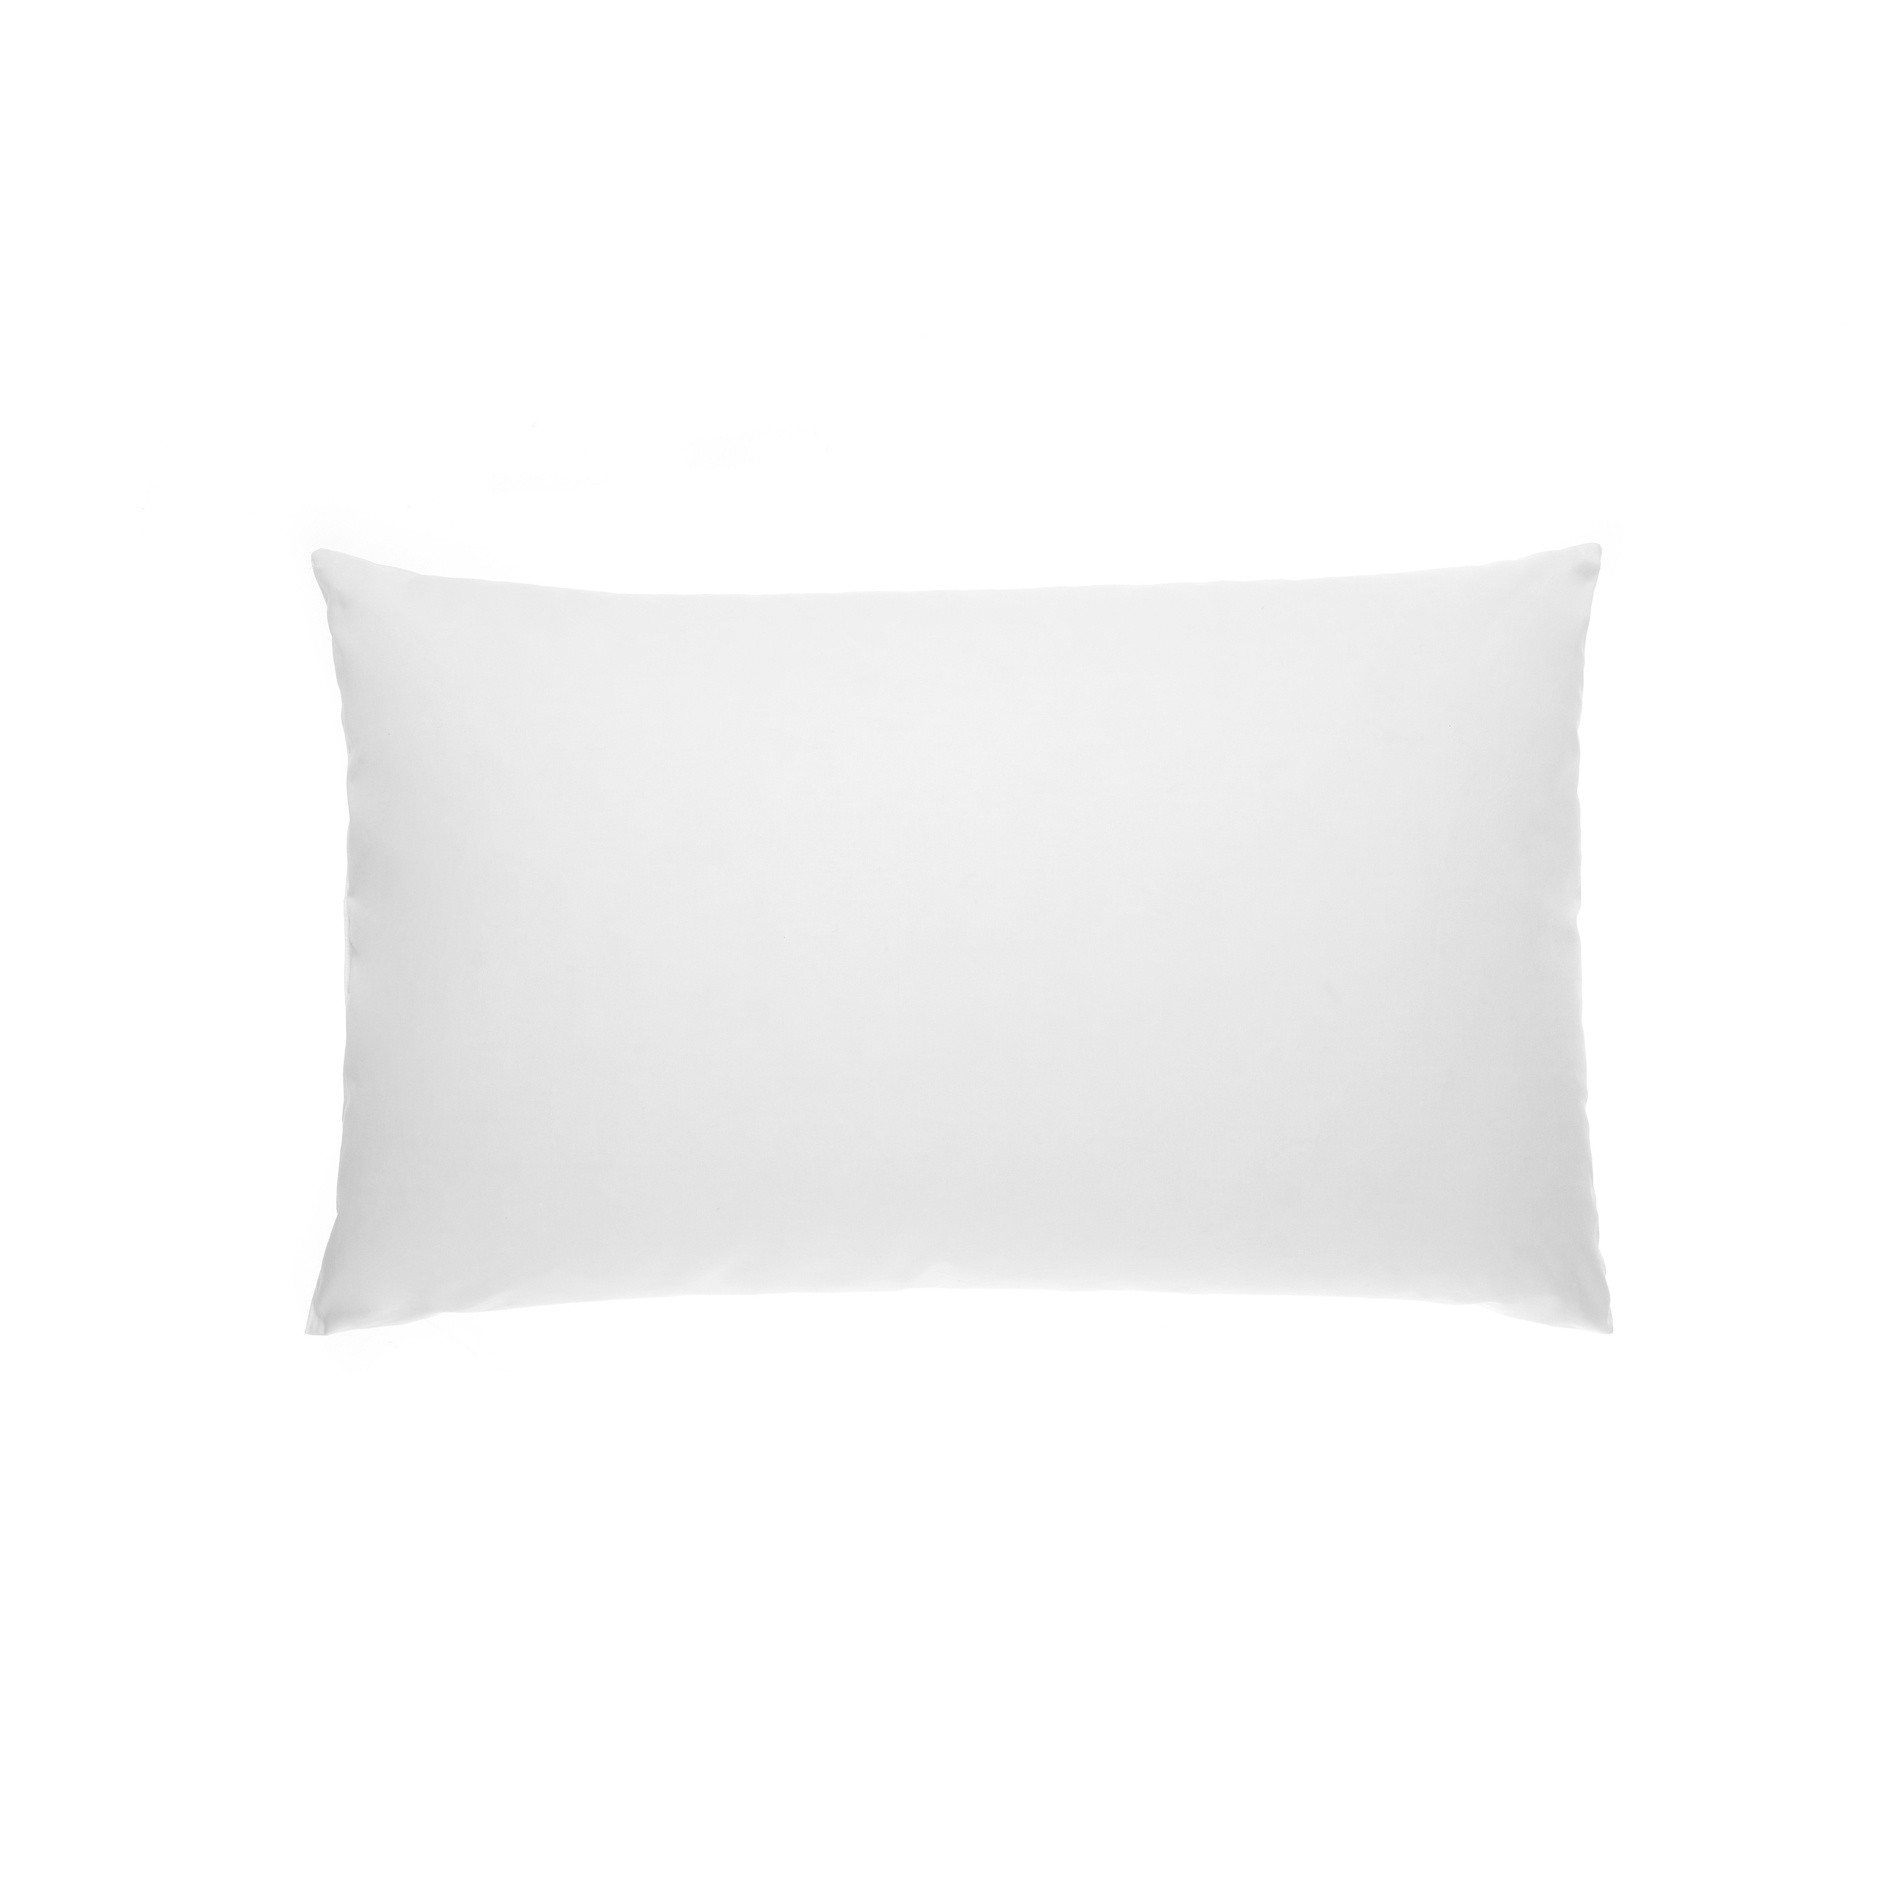 Smeraldo feather pillow, White, large image number 0